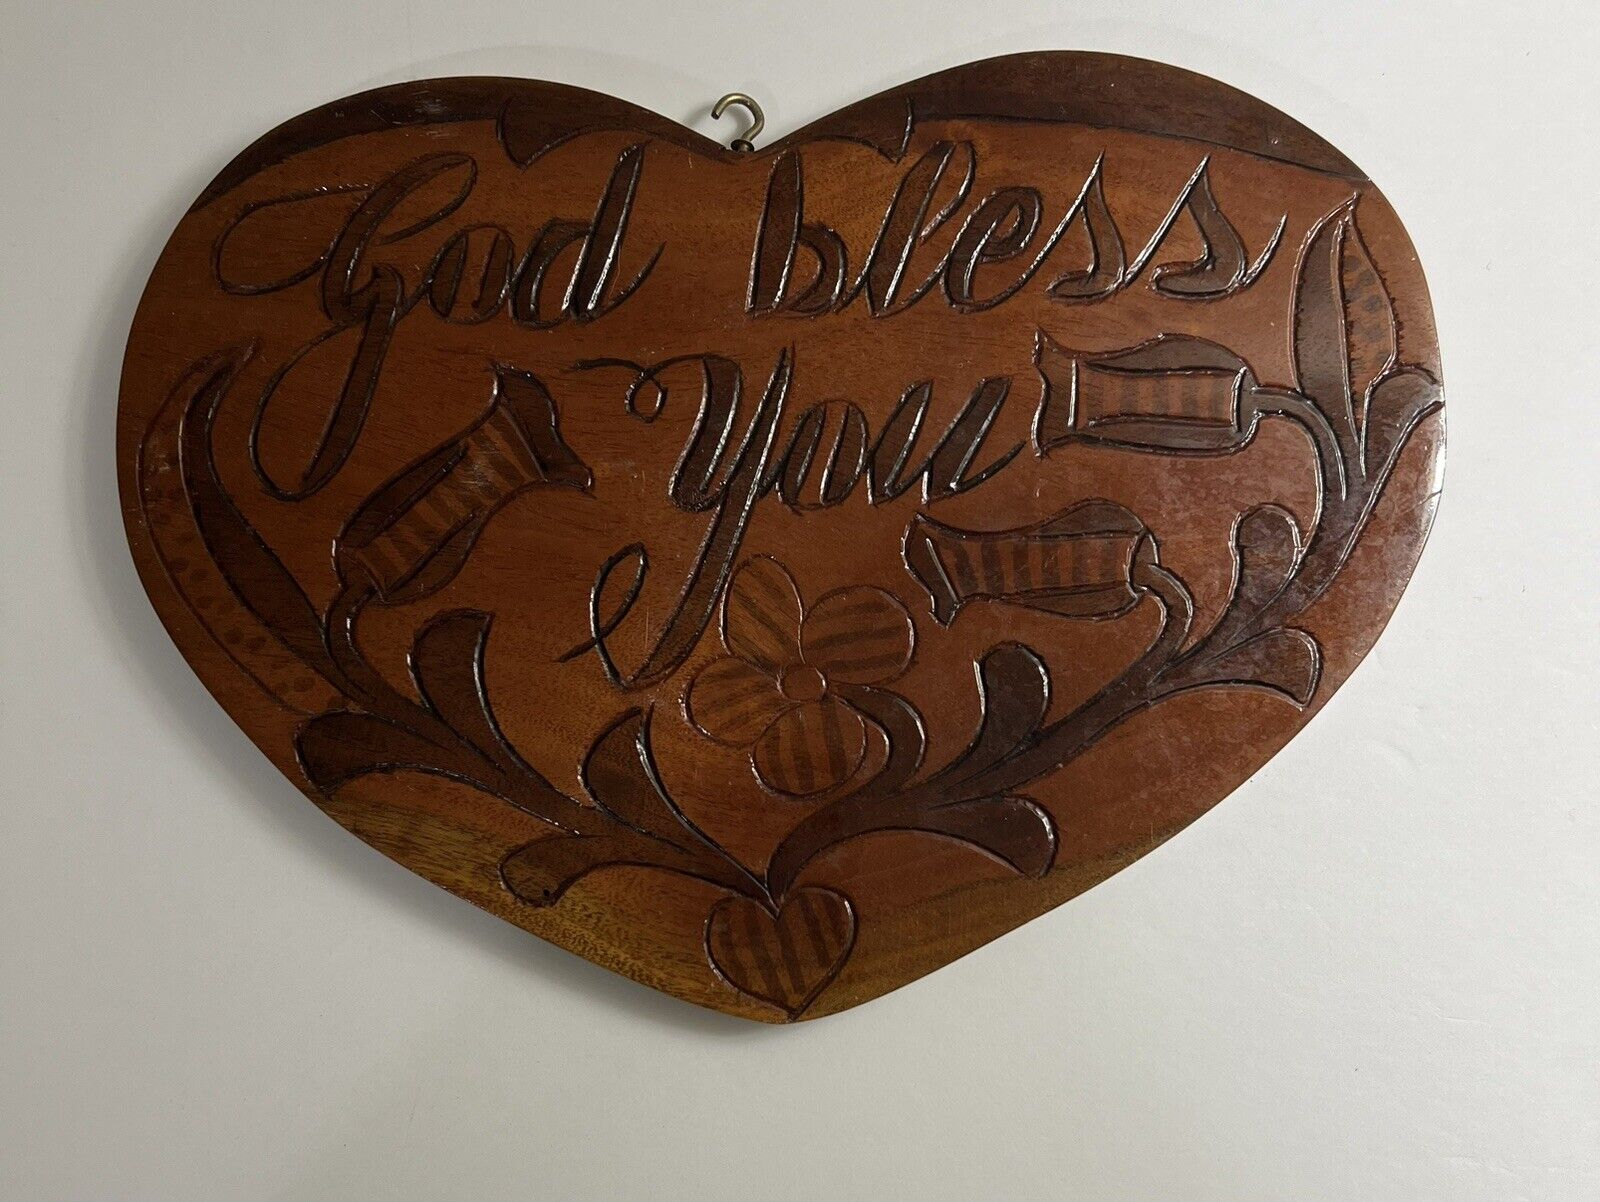 Vintage Carved GOD BLESS YOU Wood  Wall Plaque HEART SHAPED